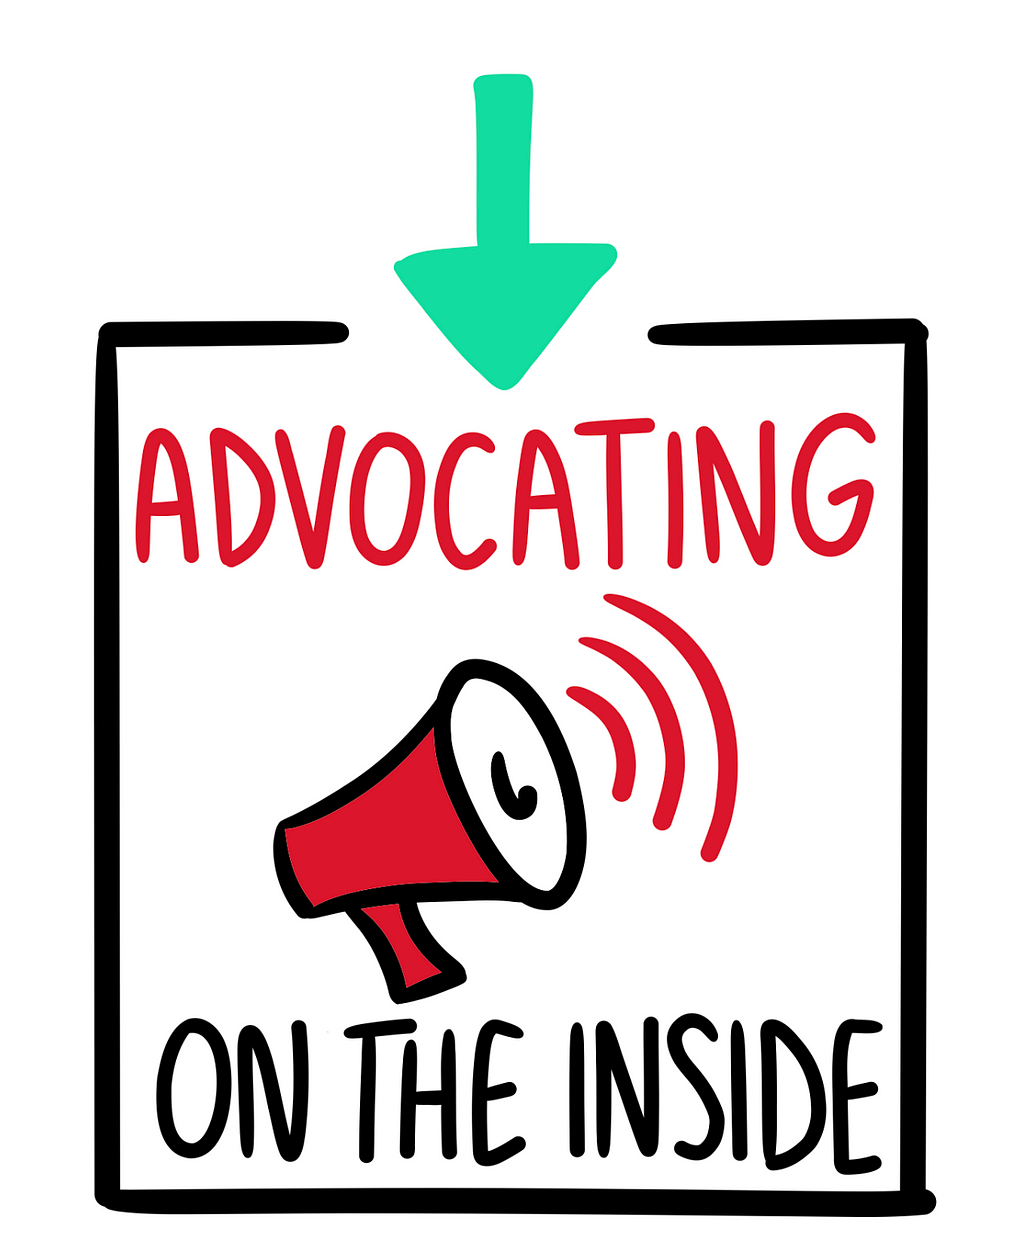 An illustration of a megaphone inside a box with the words “advocating on the inside”